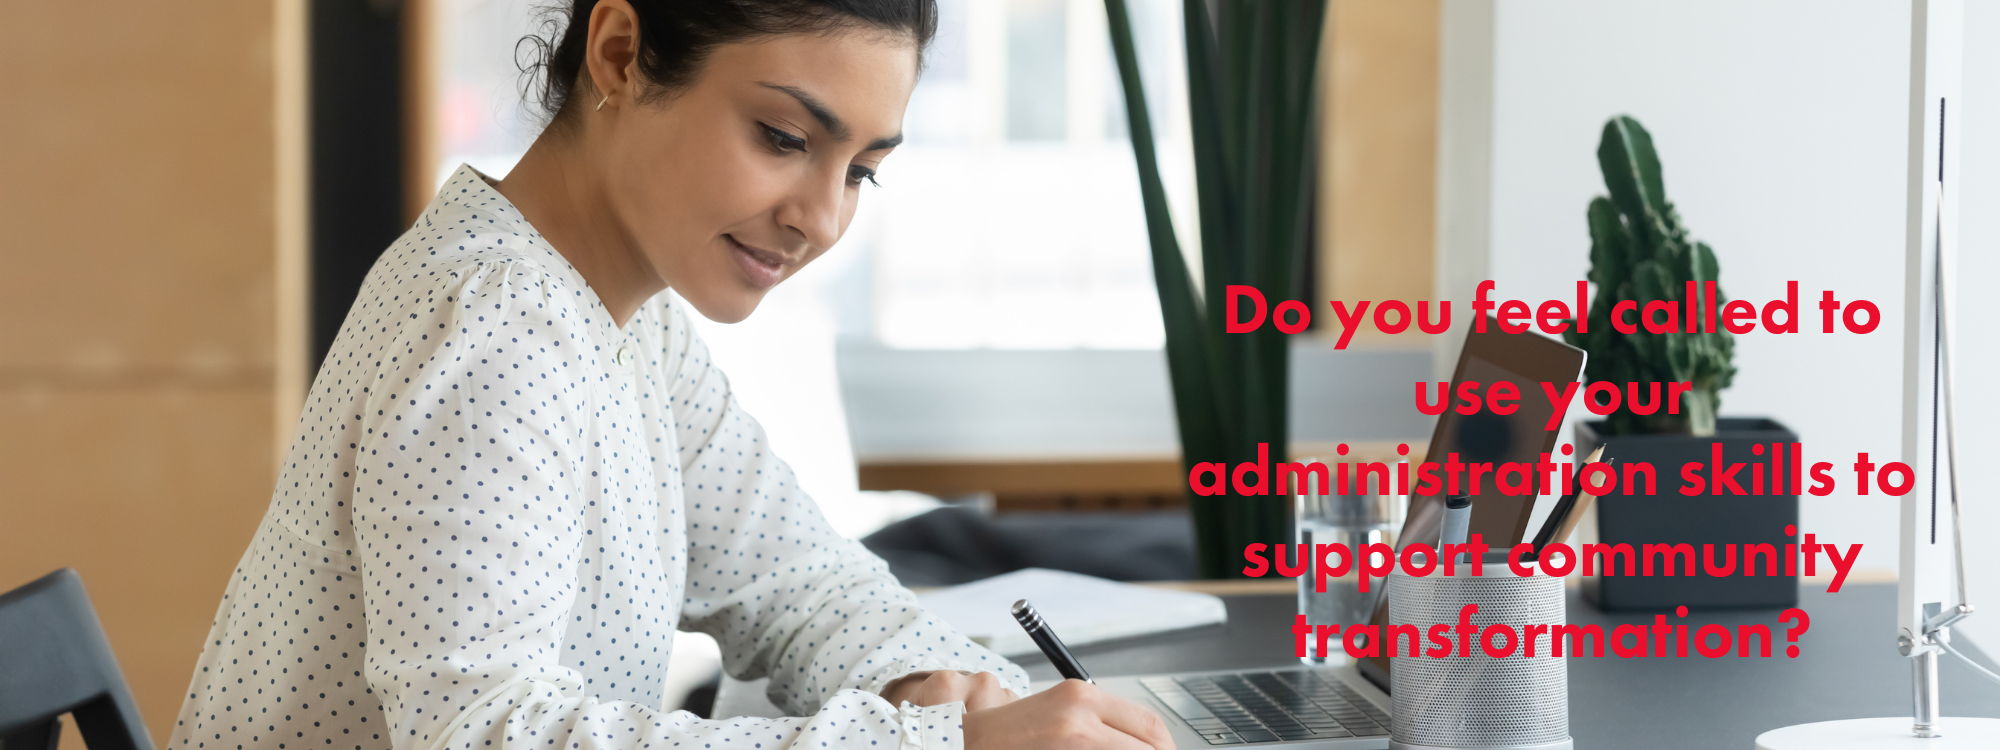 Do you want to use your administration skills for God?